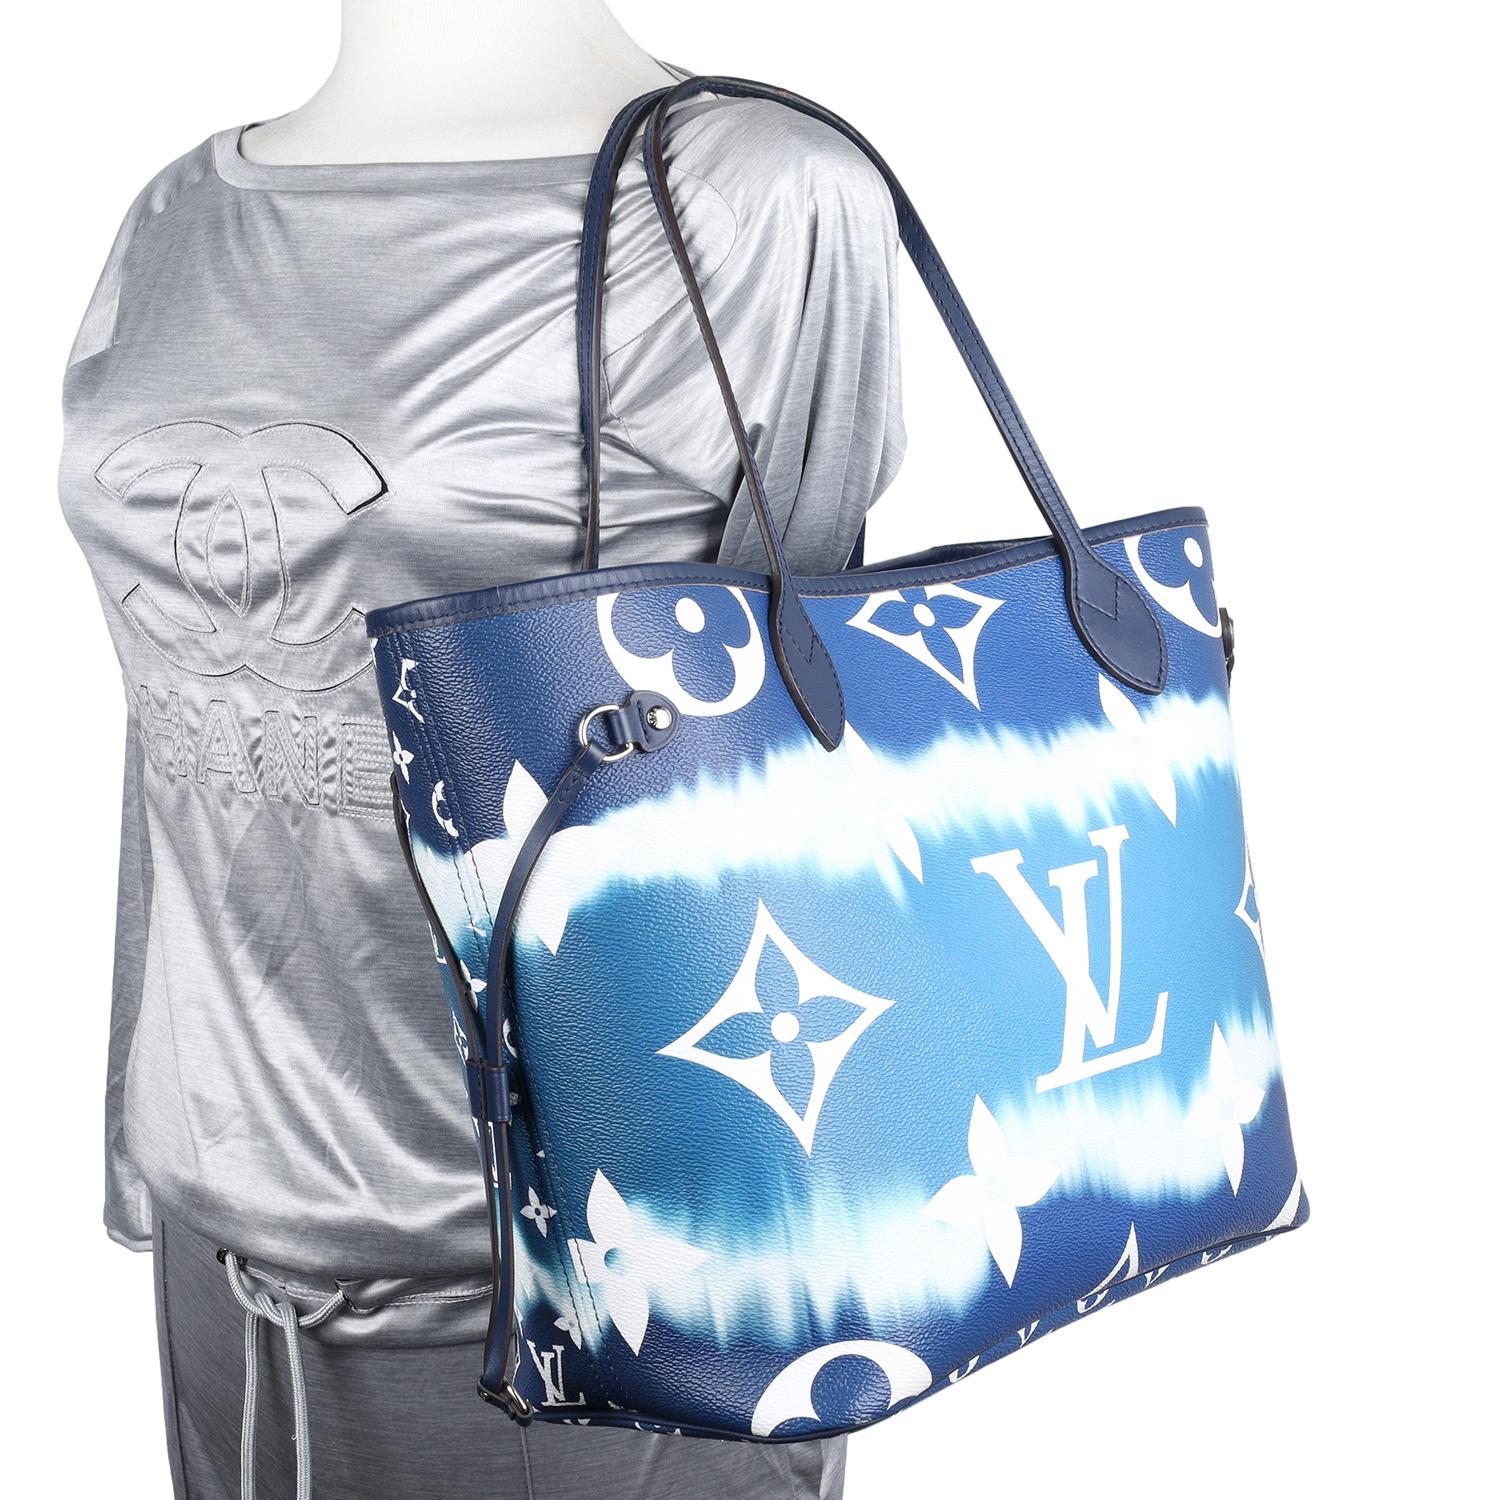 Authentic Escale Giant Neverfull MM Blue White Tie Dye Tote Handle Shoulder Bag. Features monogram canvas, leather trim and leather straps, textile interior lining with zipper slip pocket, silver hardware, leather straps for the hand, shoulder or